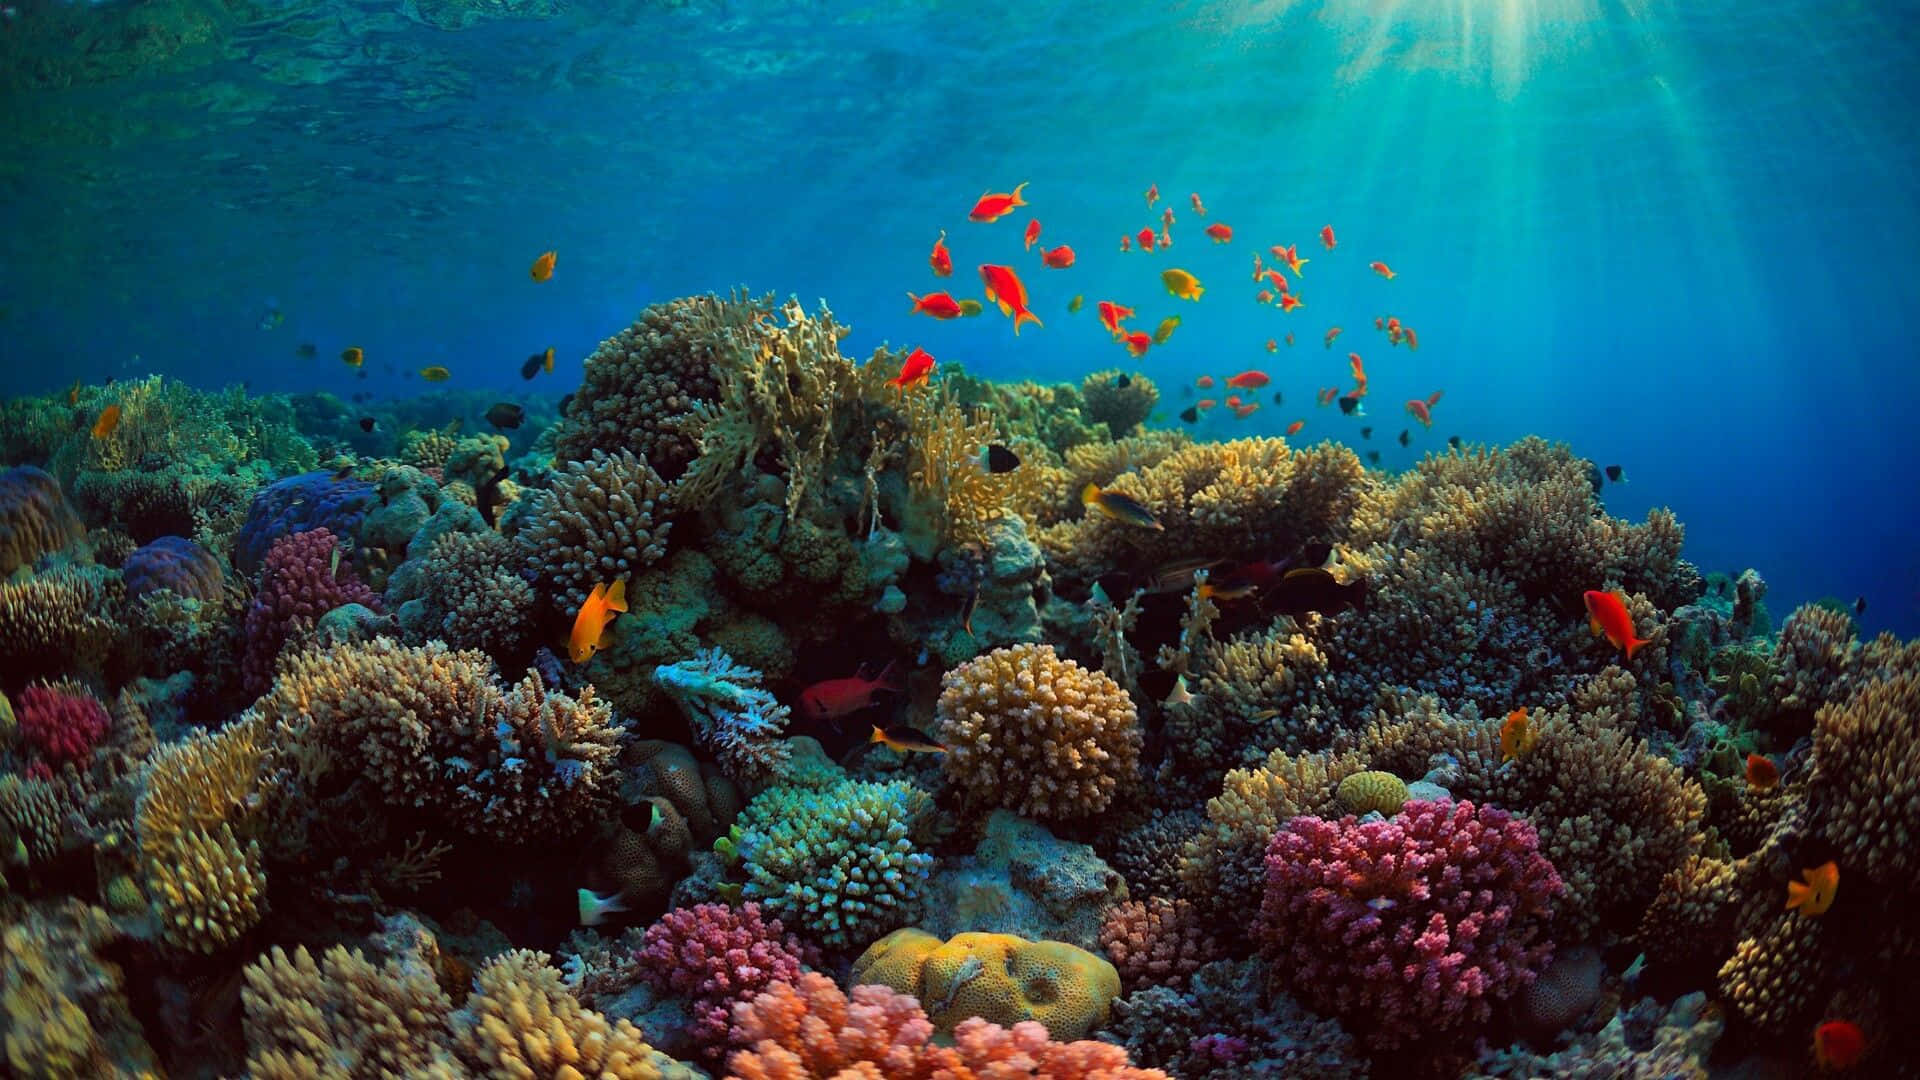 A Colorful Underwater Paradise